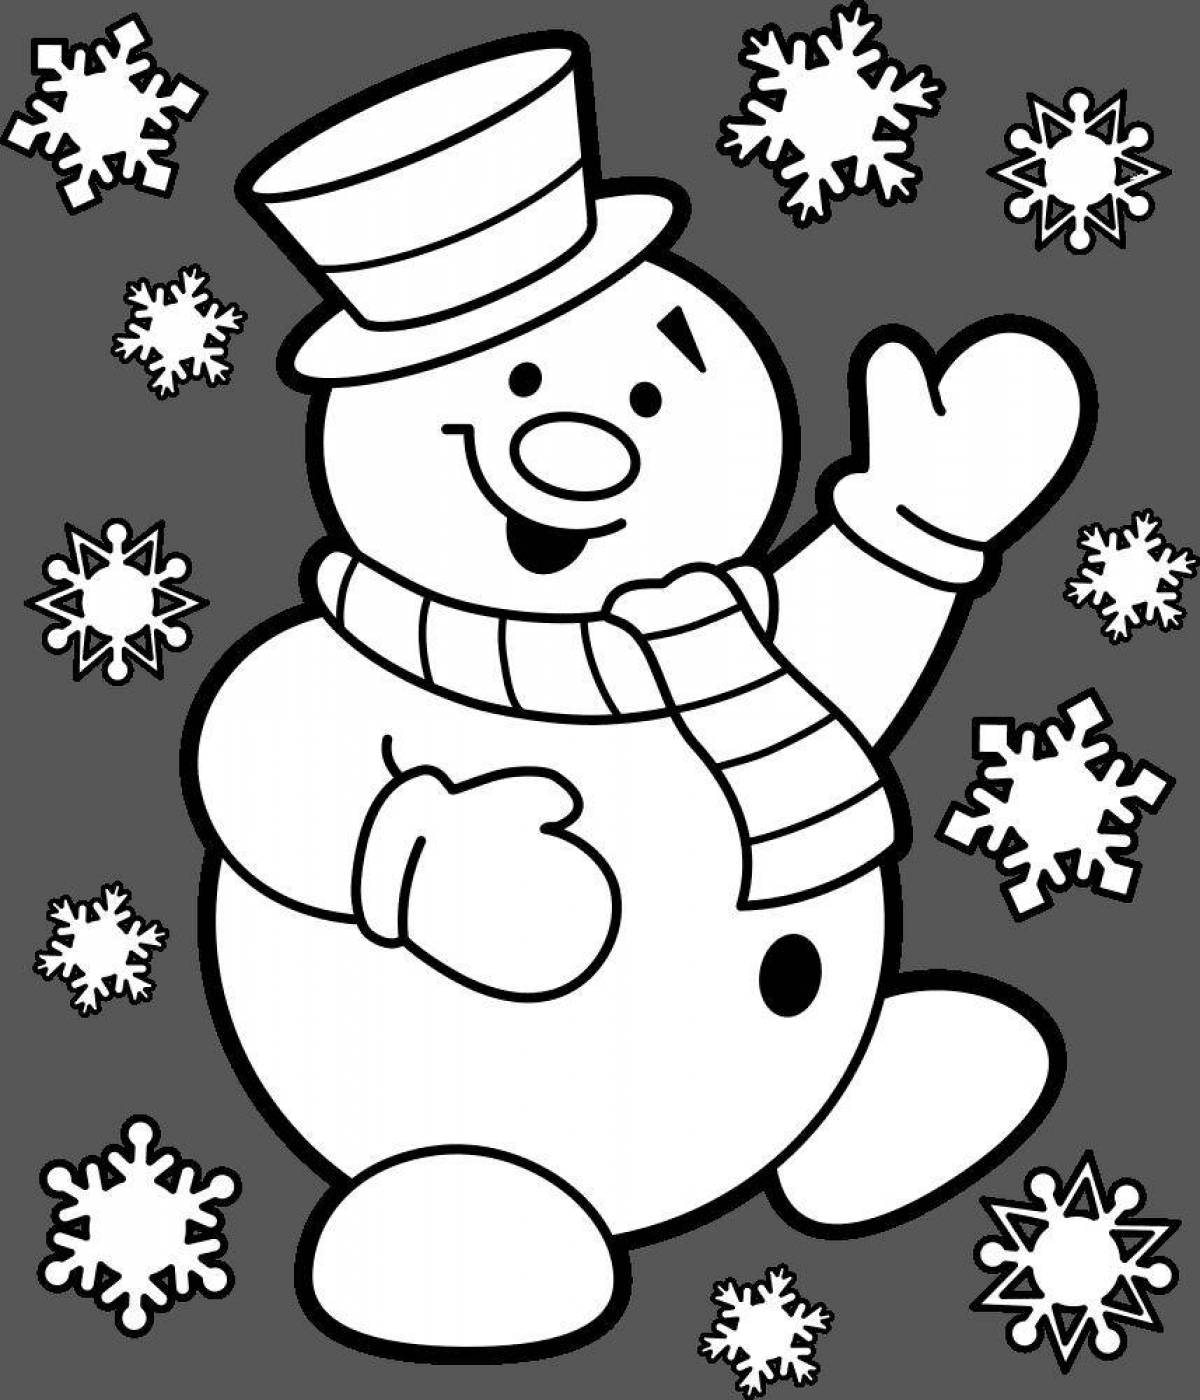 Playful snowman coloring book for kids 4-5 years old